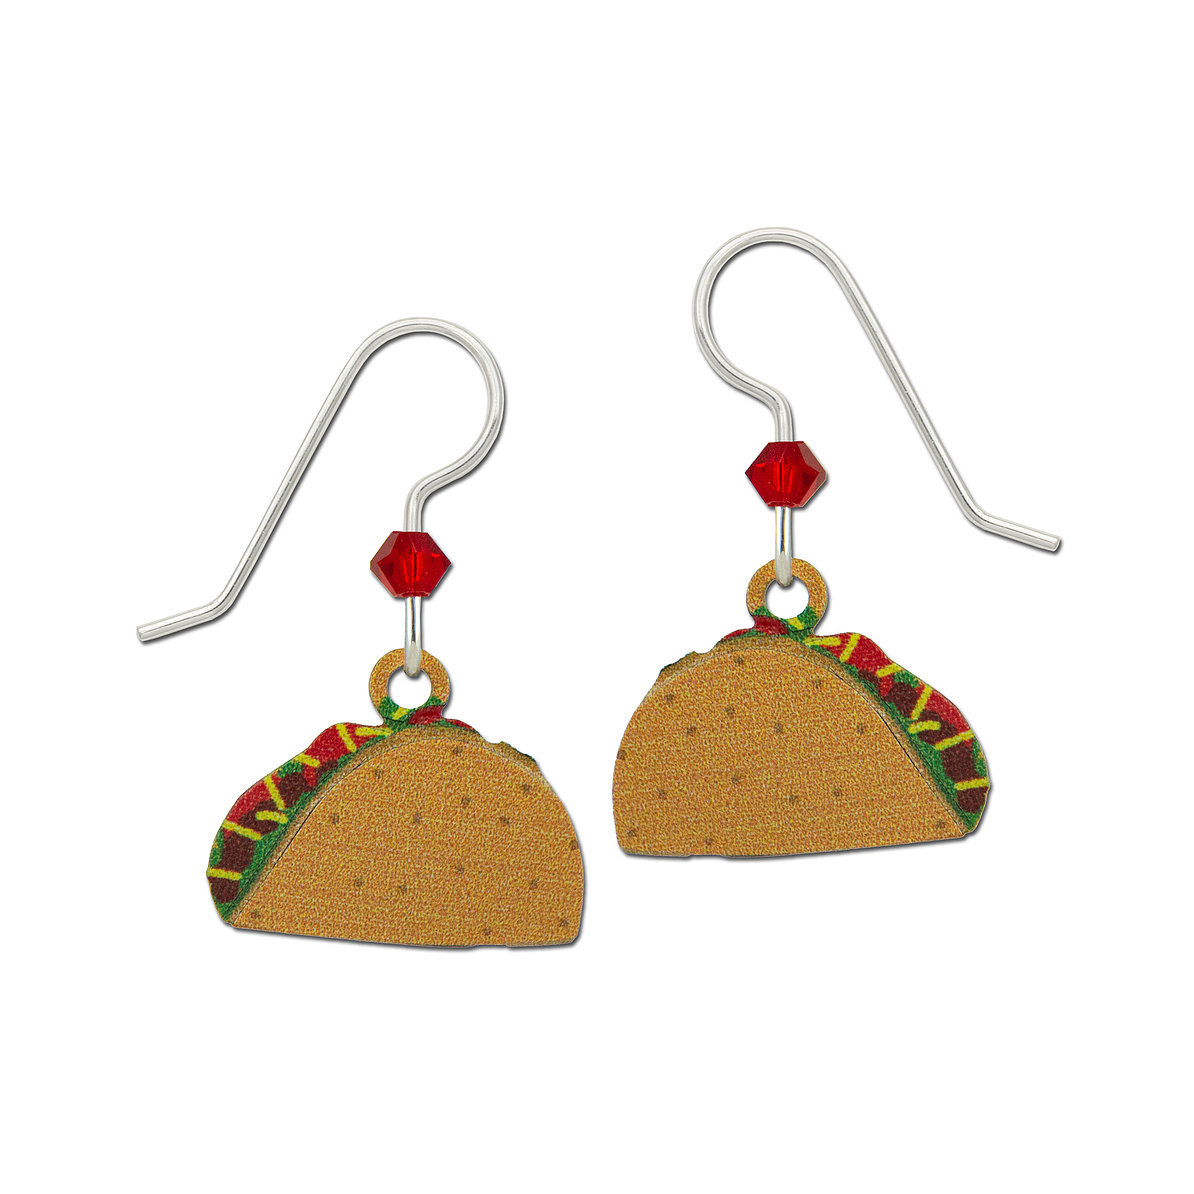 Taco earrings with sterling silver ear-wires